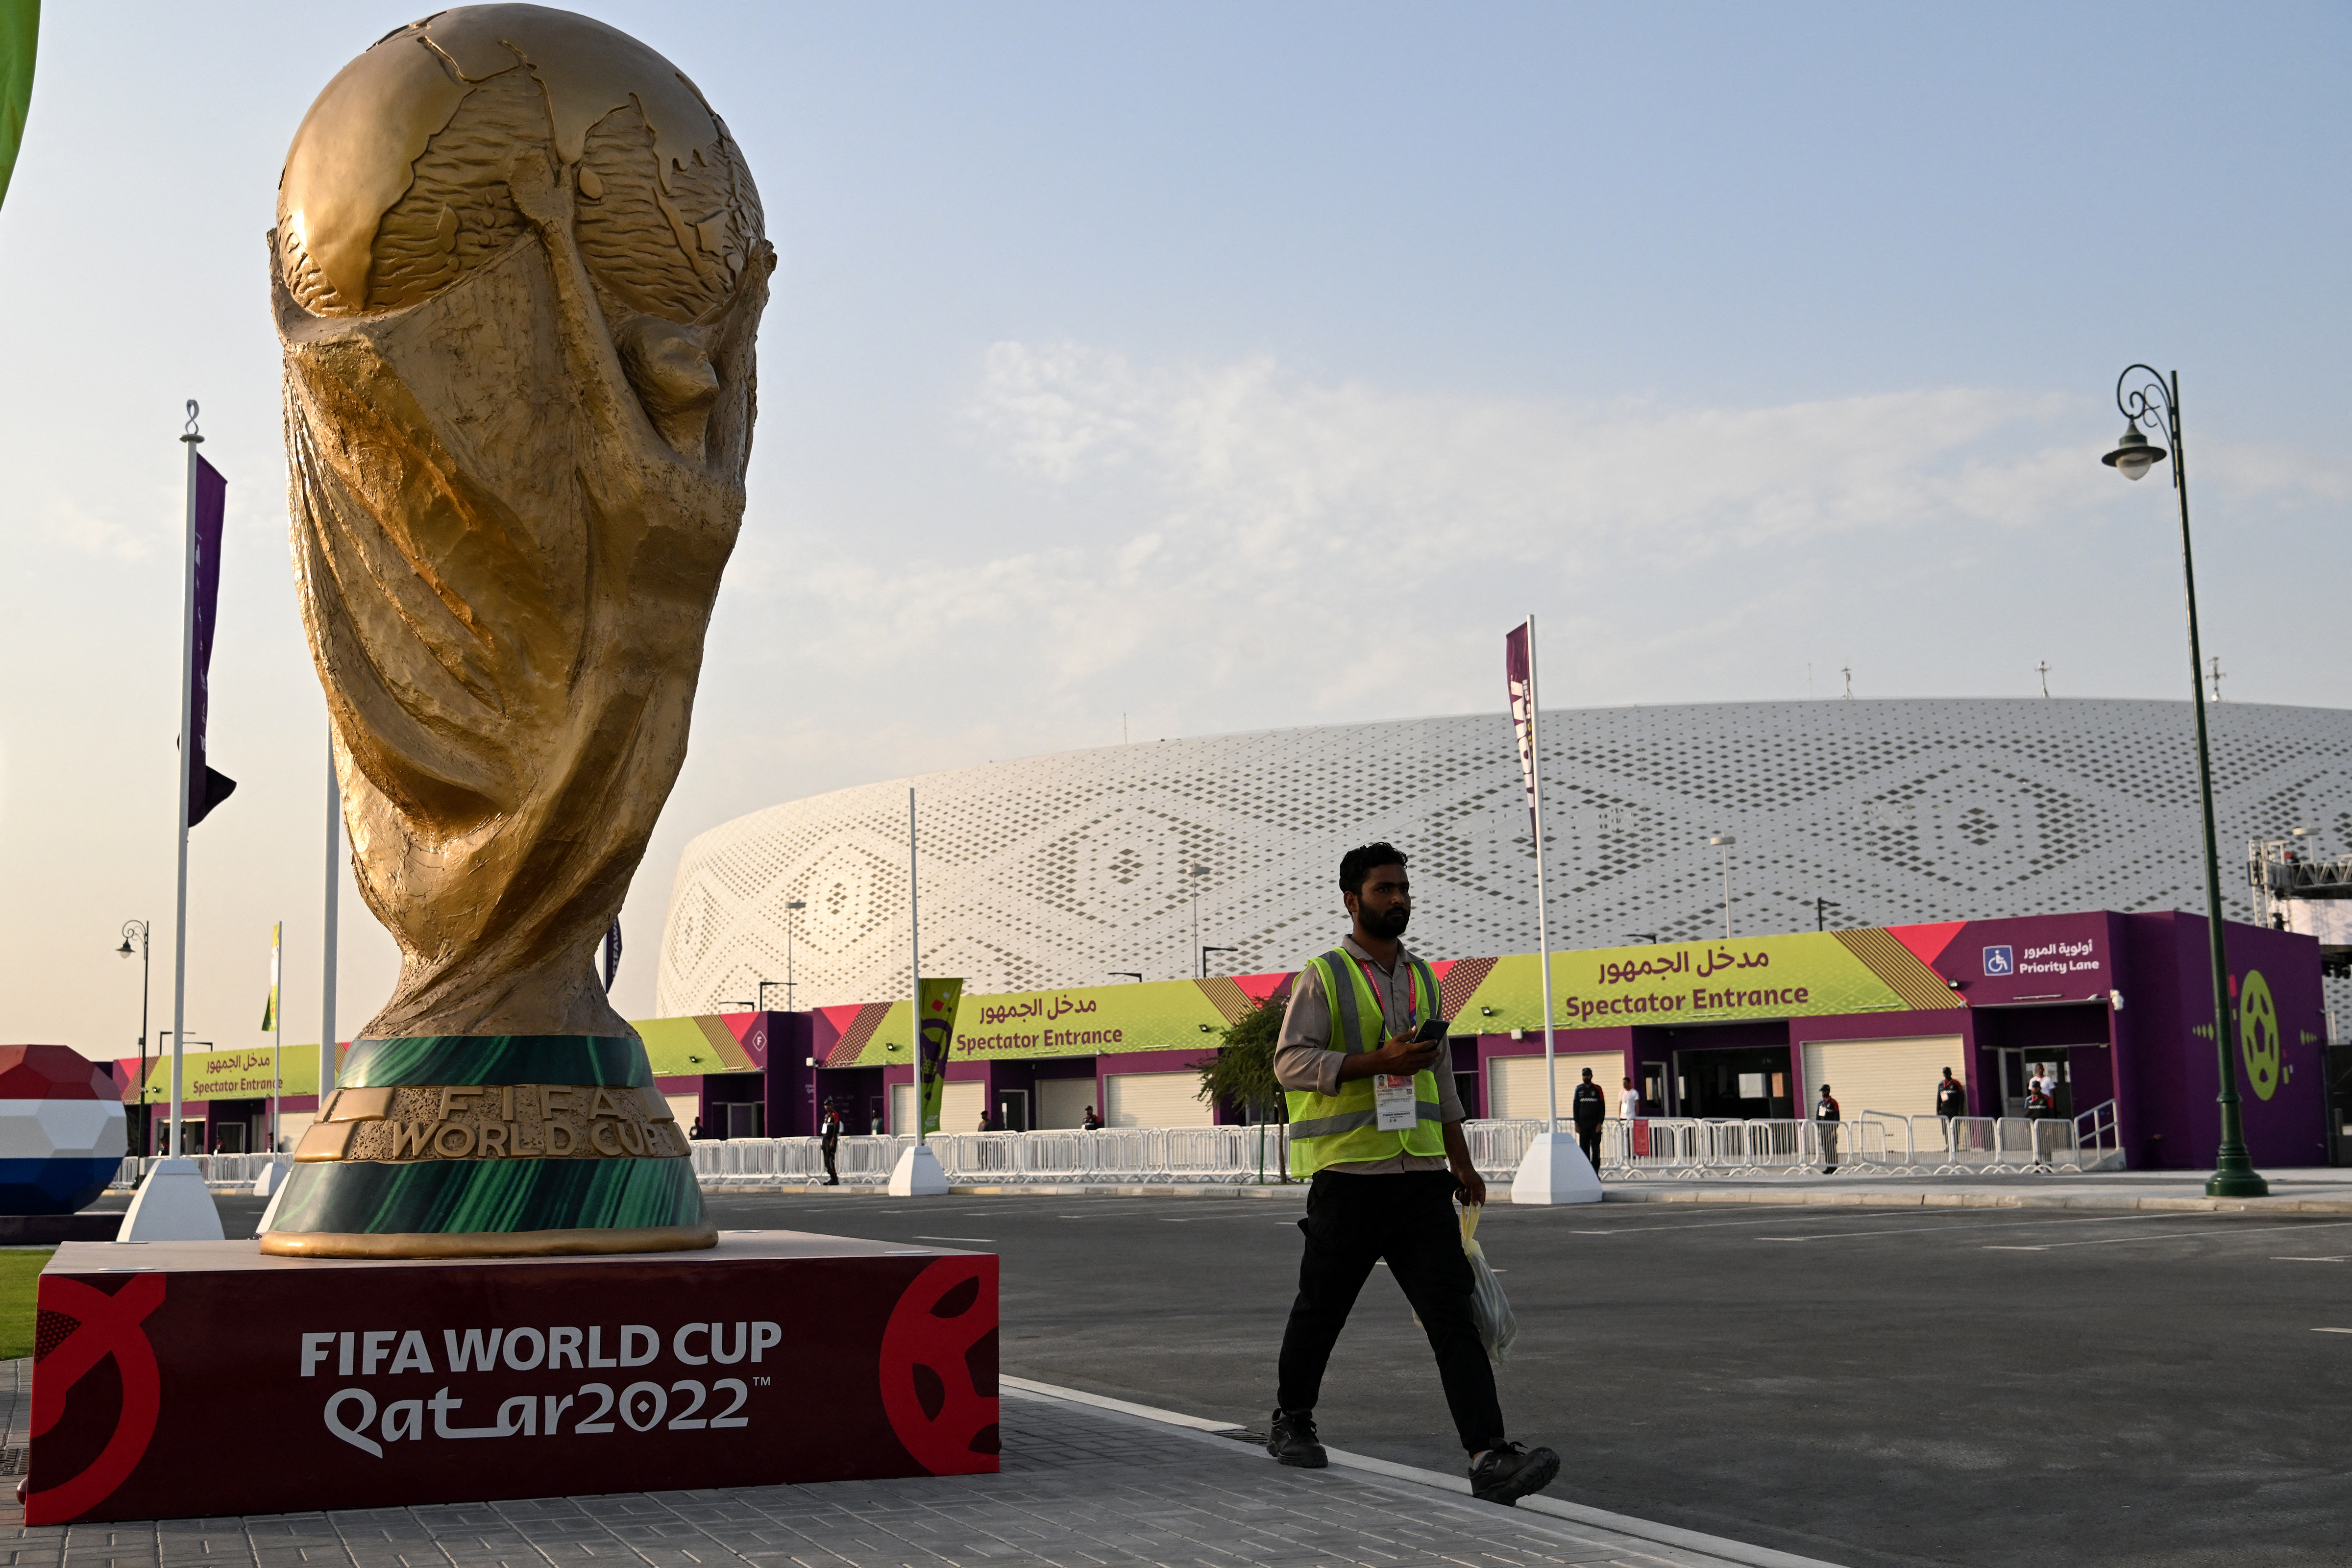 How far is World Cup host Qatar ready to go to control media coverage? RSF